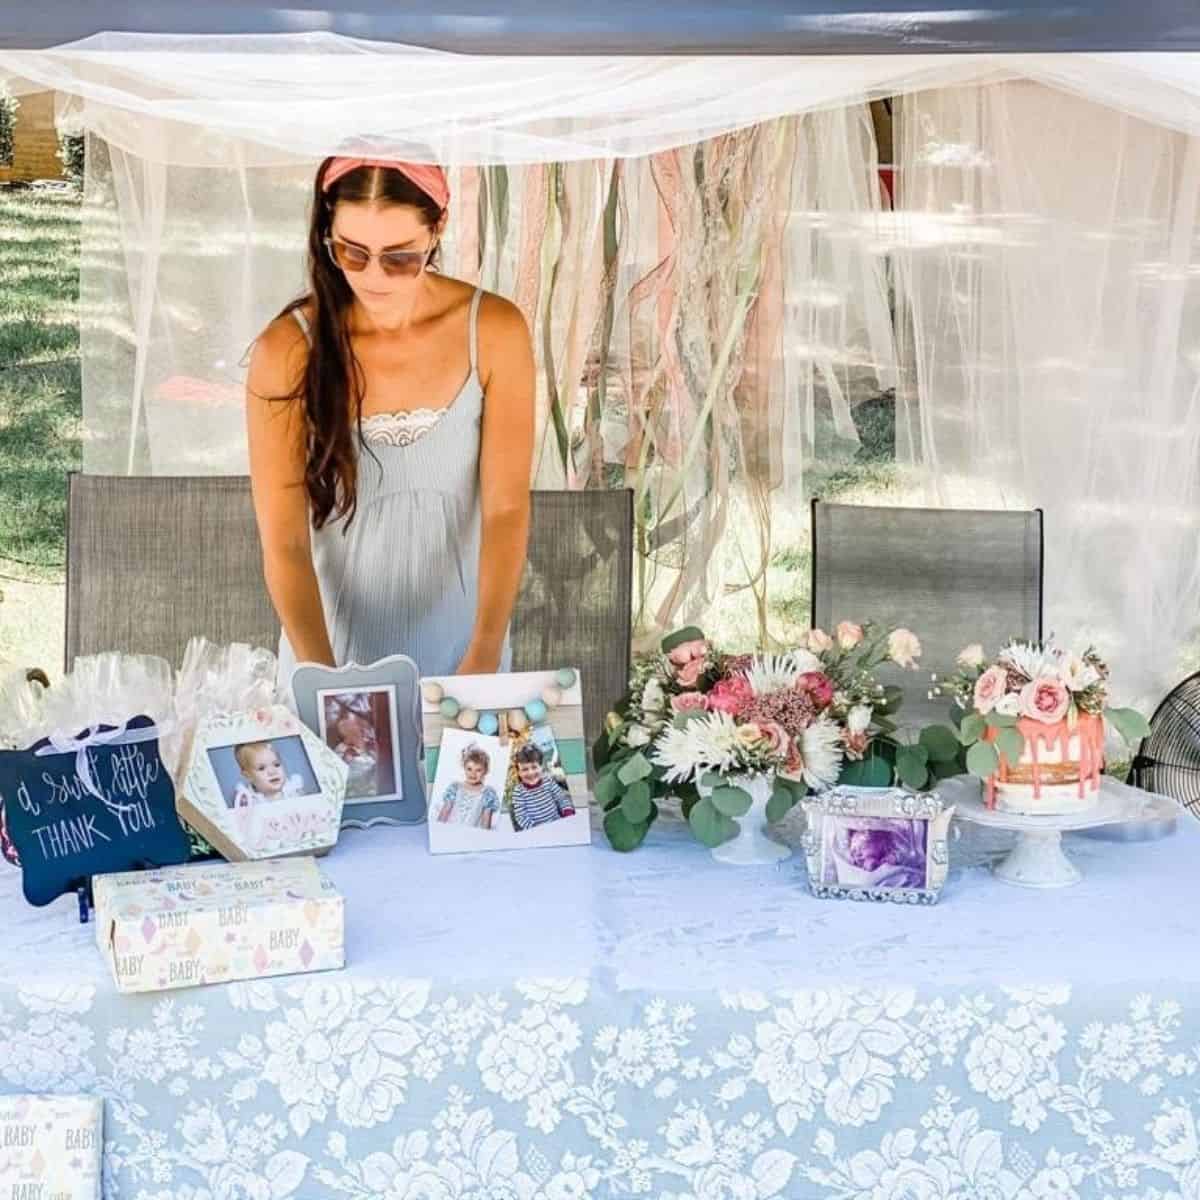 woman standing behind outdoor table with decorations and a cake for baby shower